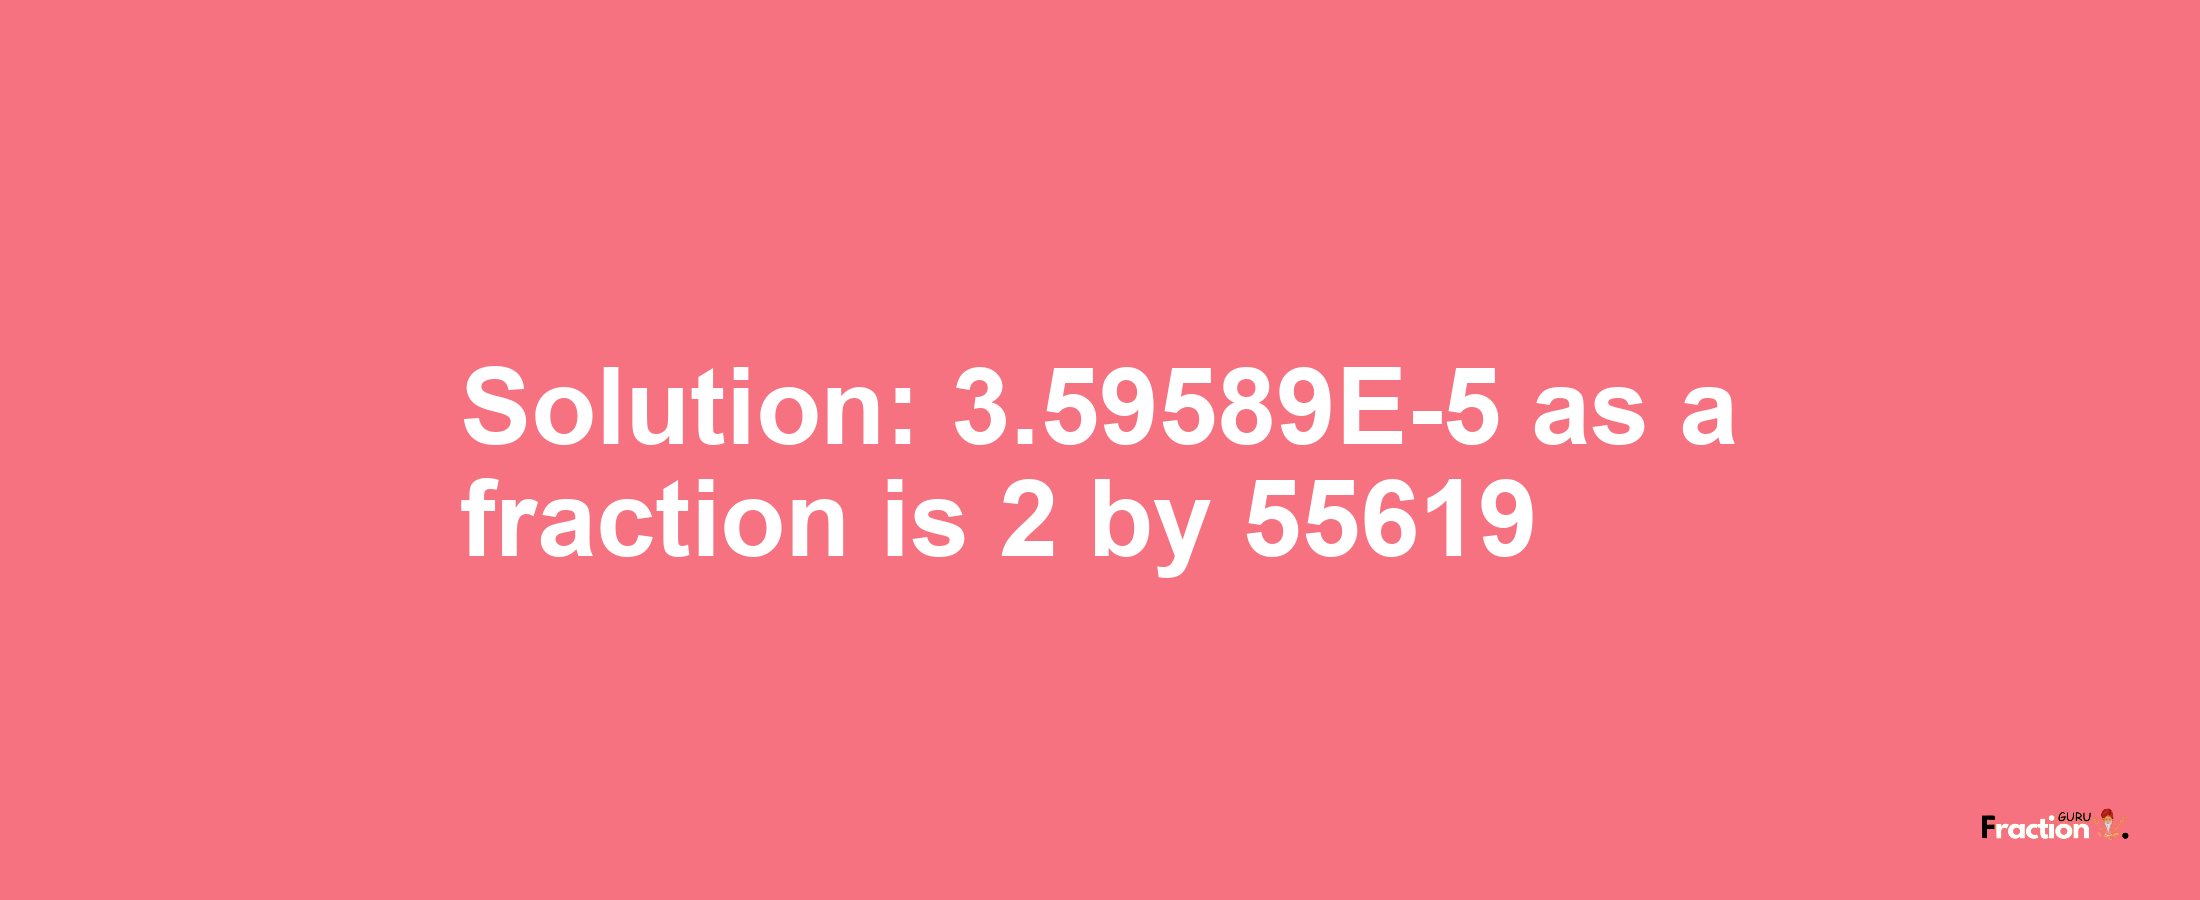 Solution:3.59589E-5 as a fraction is 2/55619